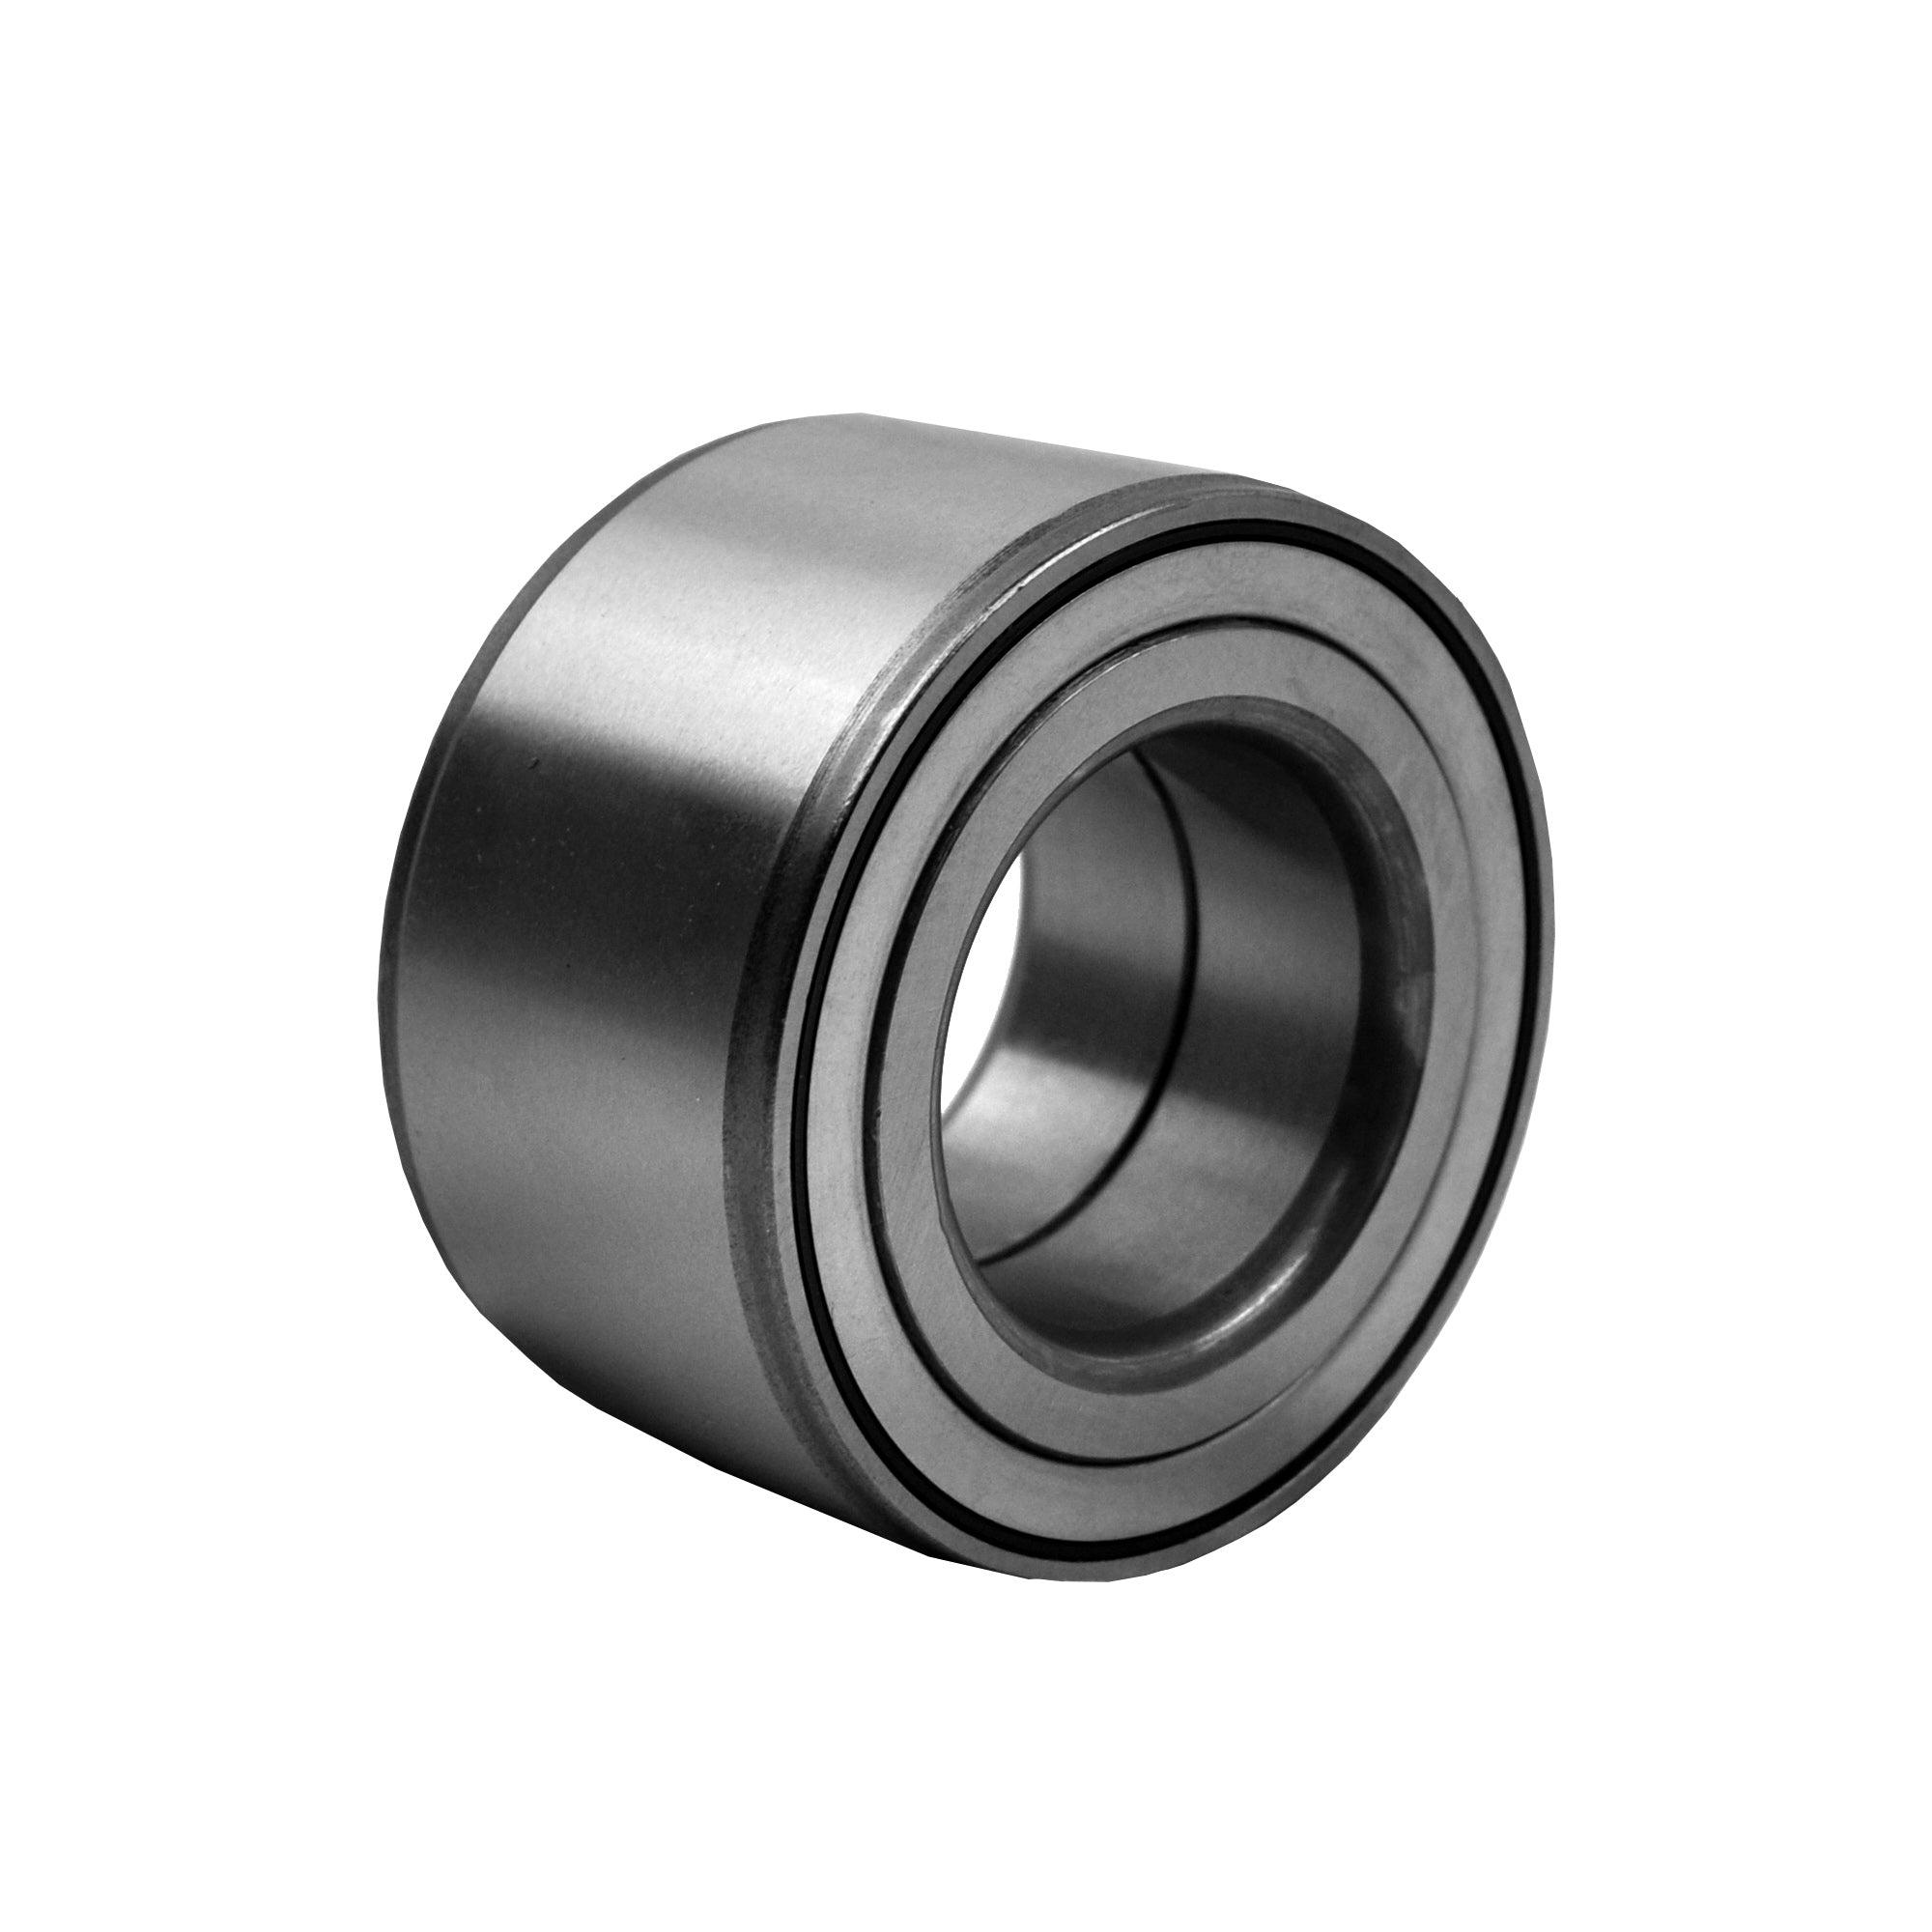 Wheel Bearing for Yamaha Grizzly 660 